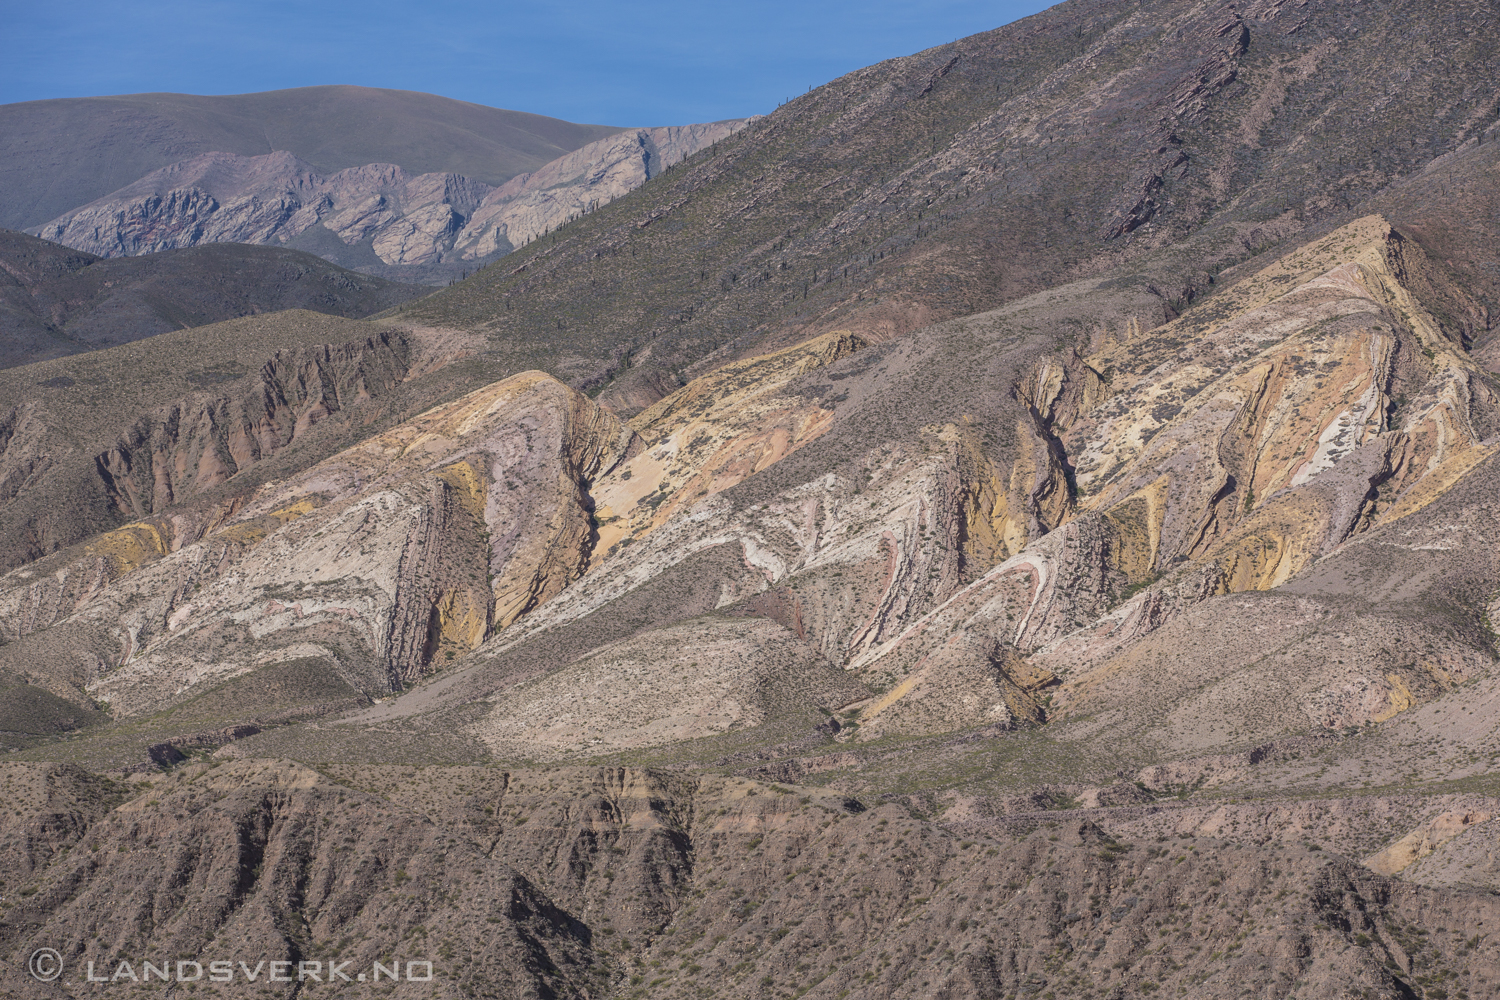 On the road to Humahuacha, Argentina. 

(Canon EOS 5D Mark III / Canon EF 70-200mm f/2.8 L IS II USM)